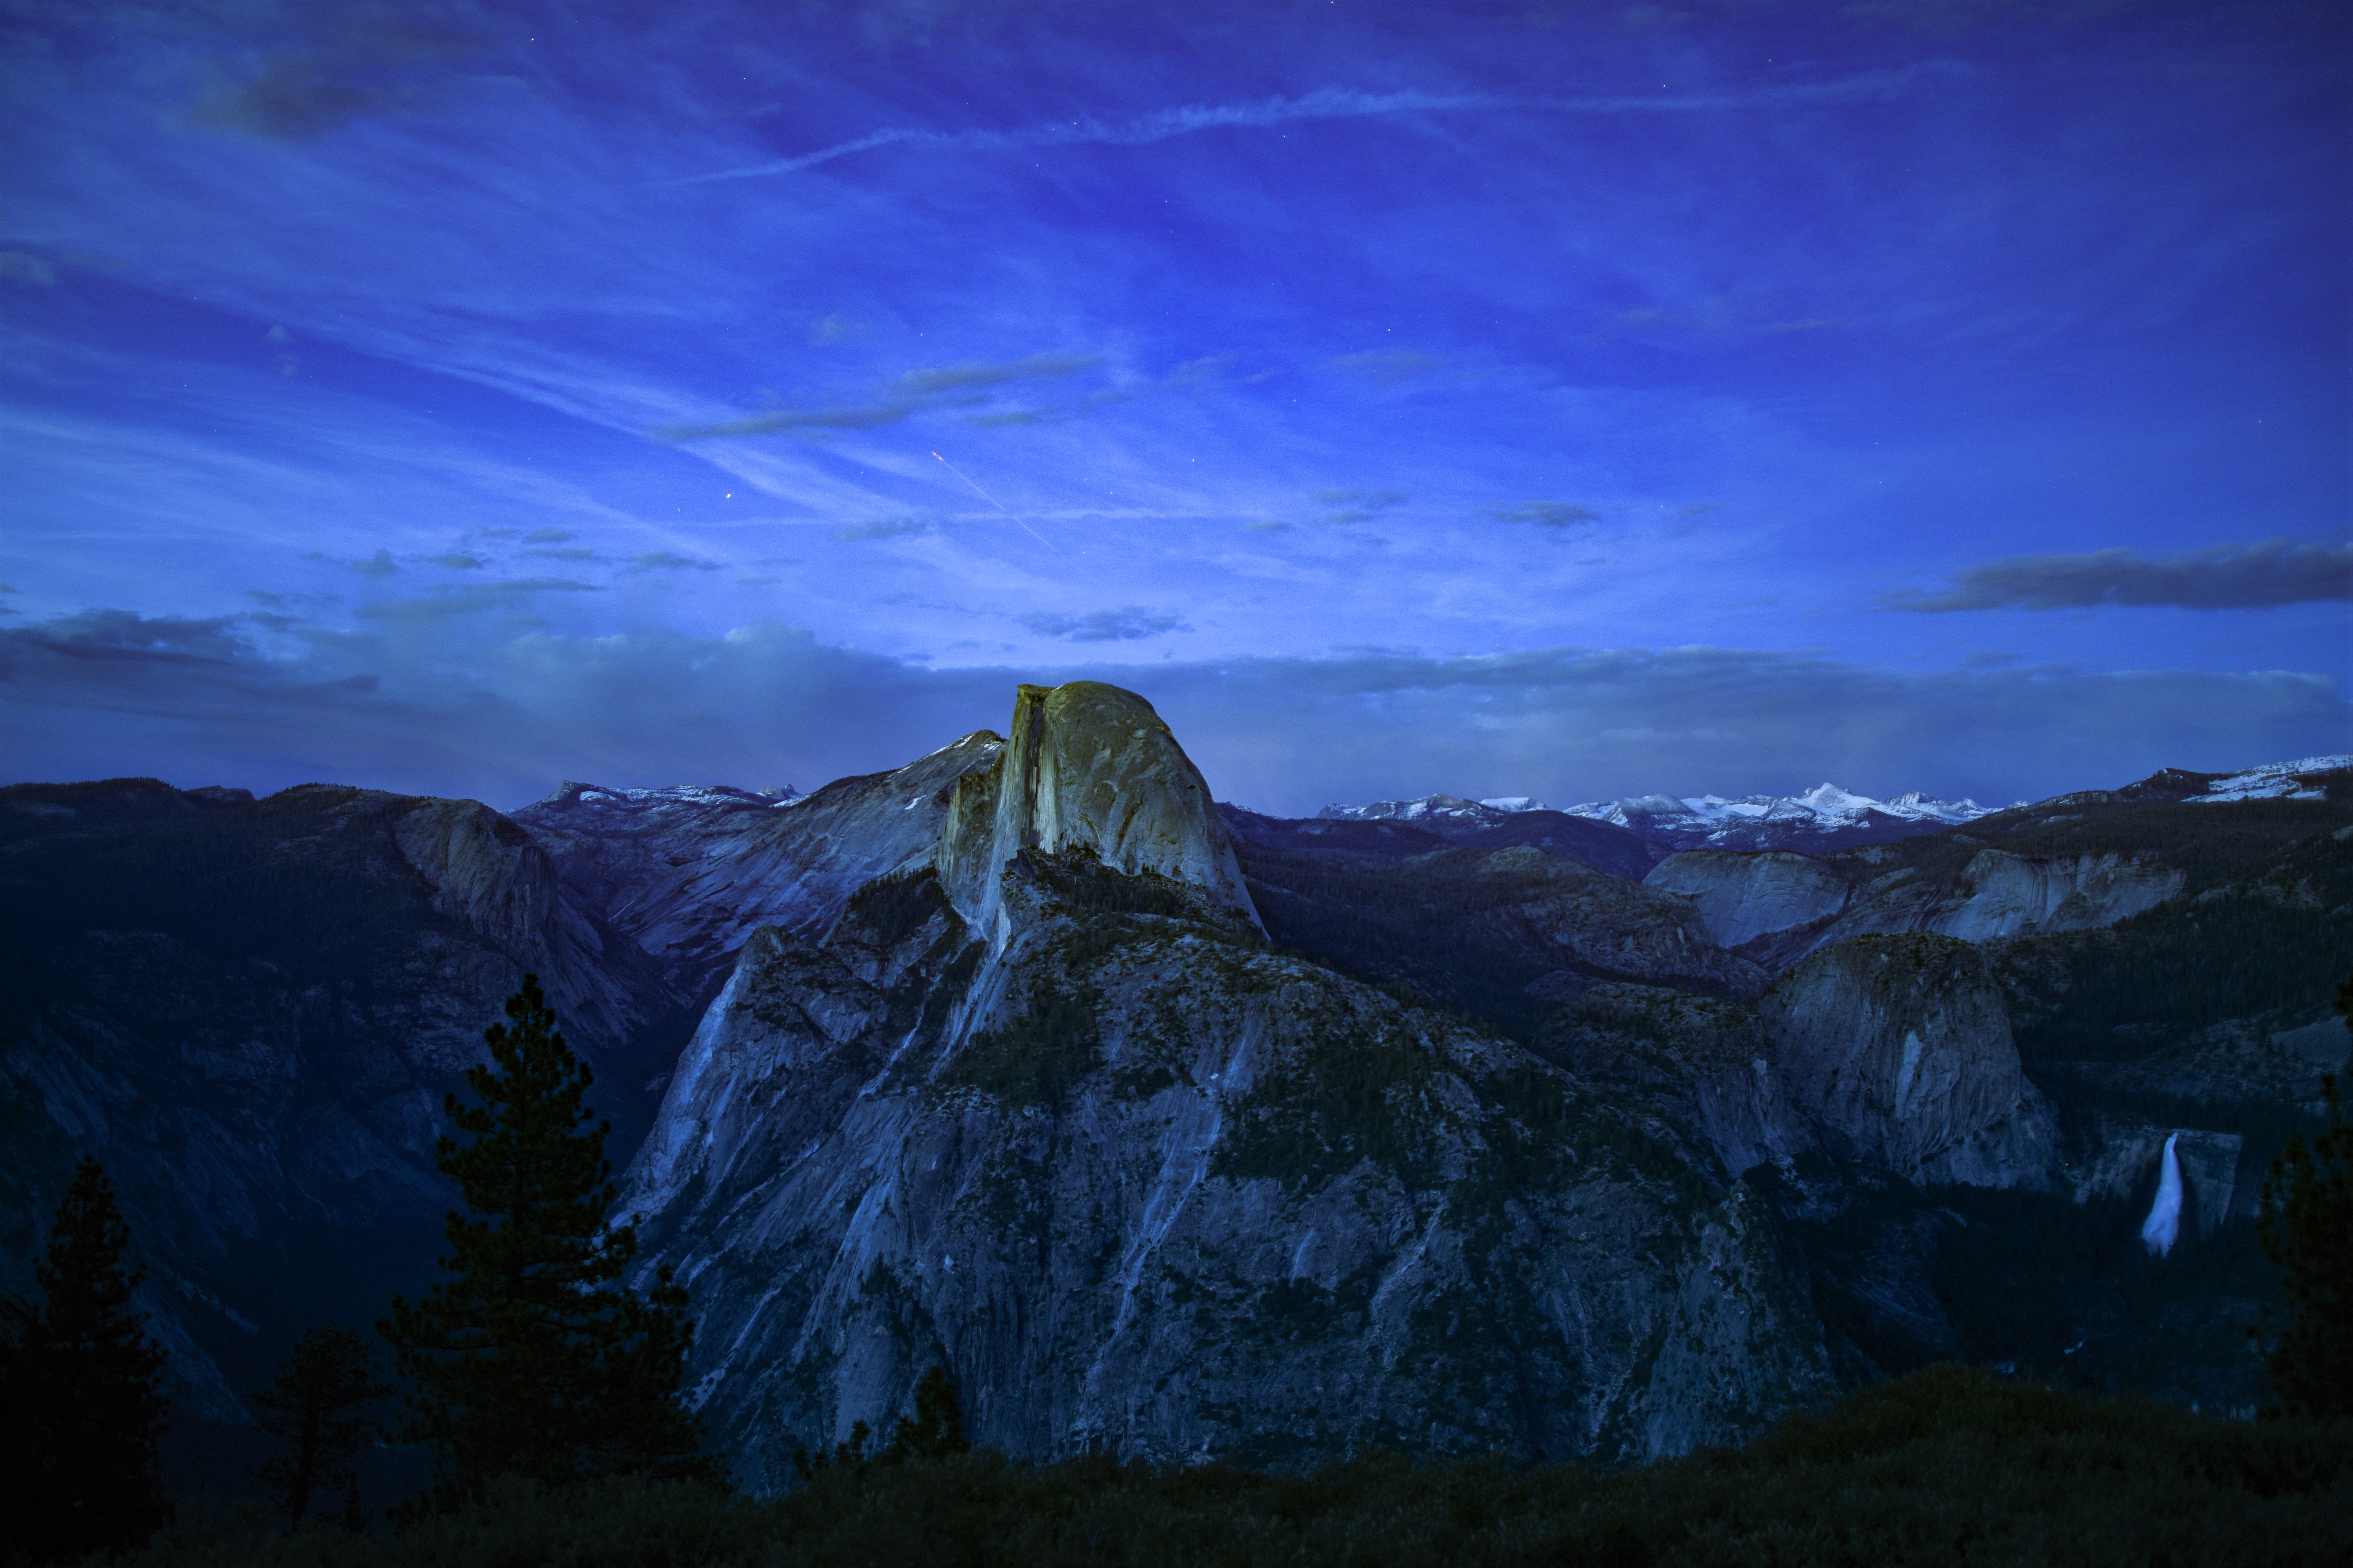 Dusk Forest Mountain Valley Yosemite National Park 6971x4645